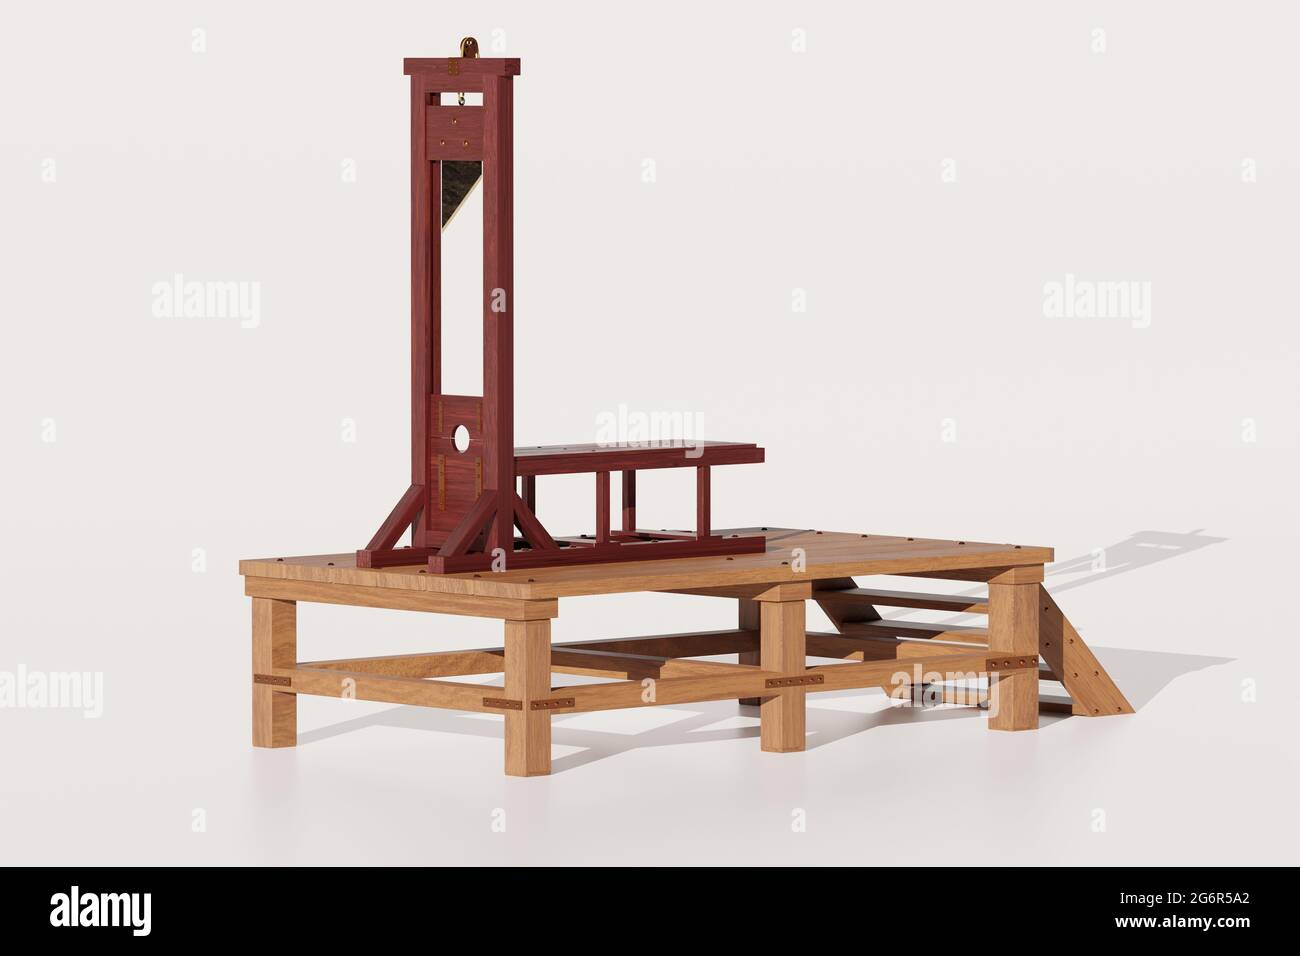 Guillotine isolated on white background. 3D illustration Stock Photo